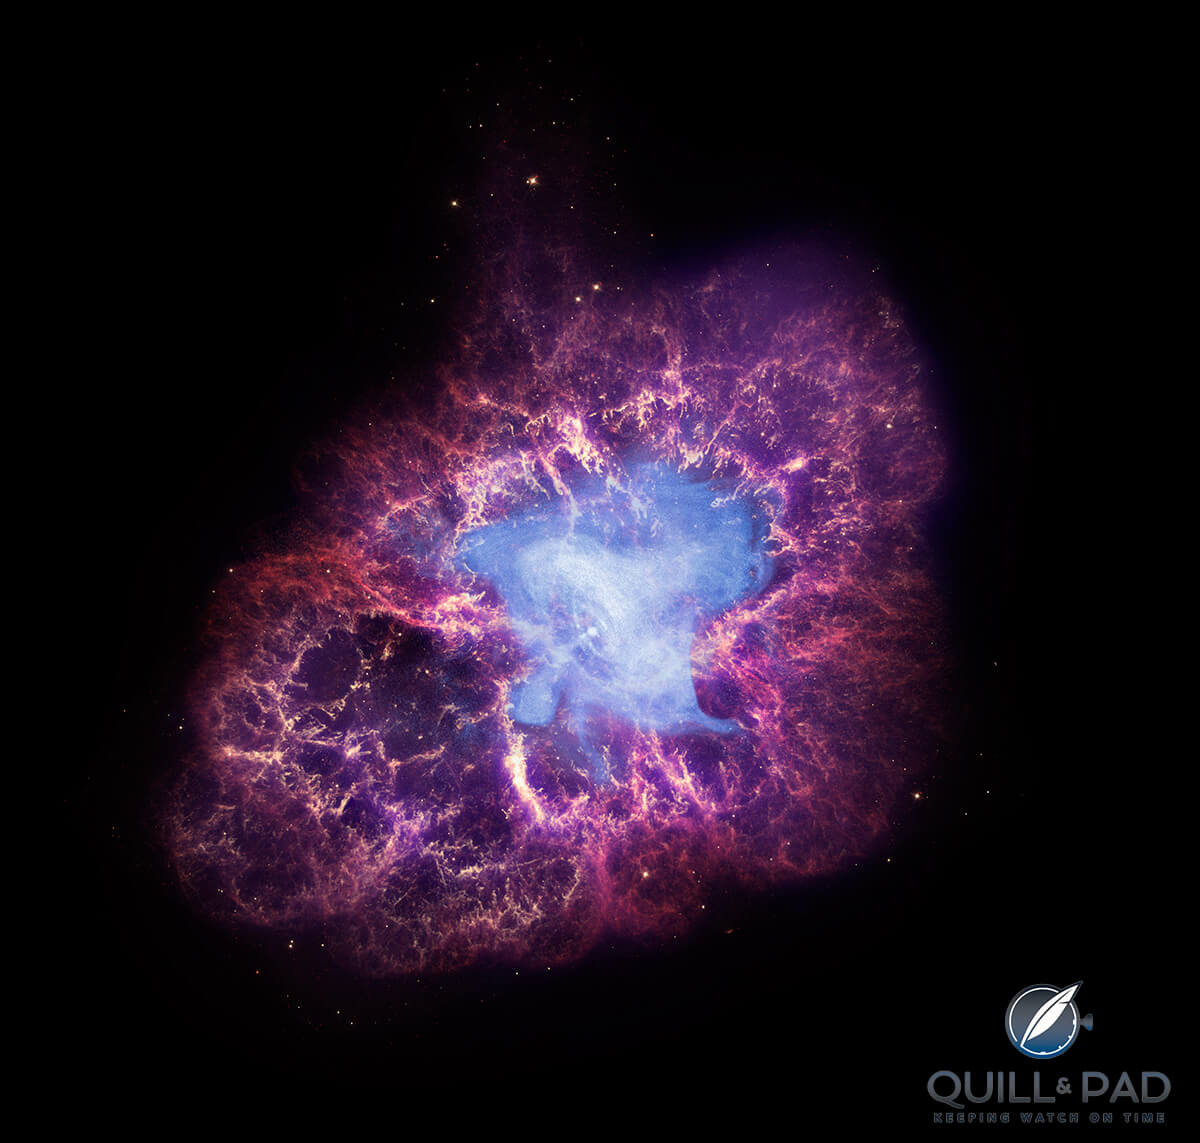 The Crab Nebula is the remnant of a massive star that ended its life in a supernova explosion. It has a rapidly rotating neutron star, or pulsar, at its core.